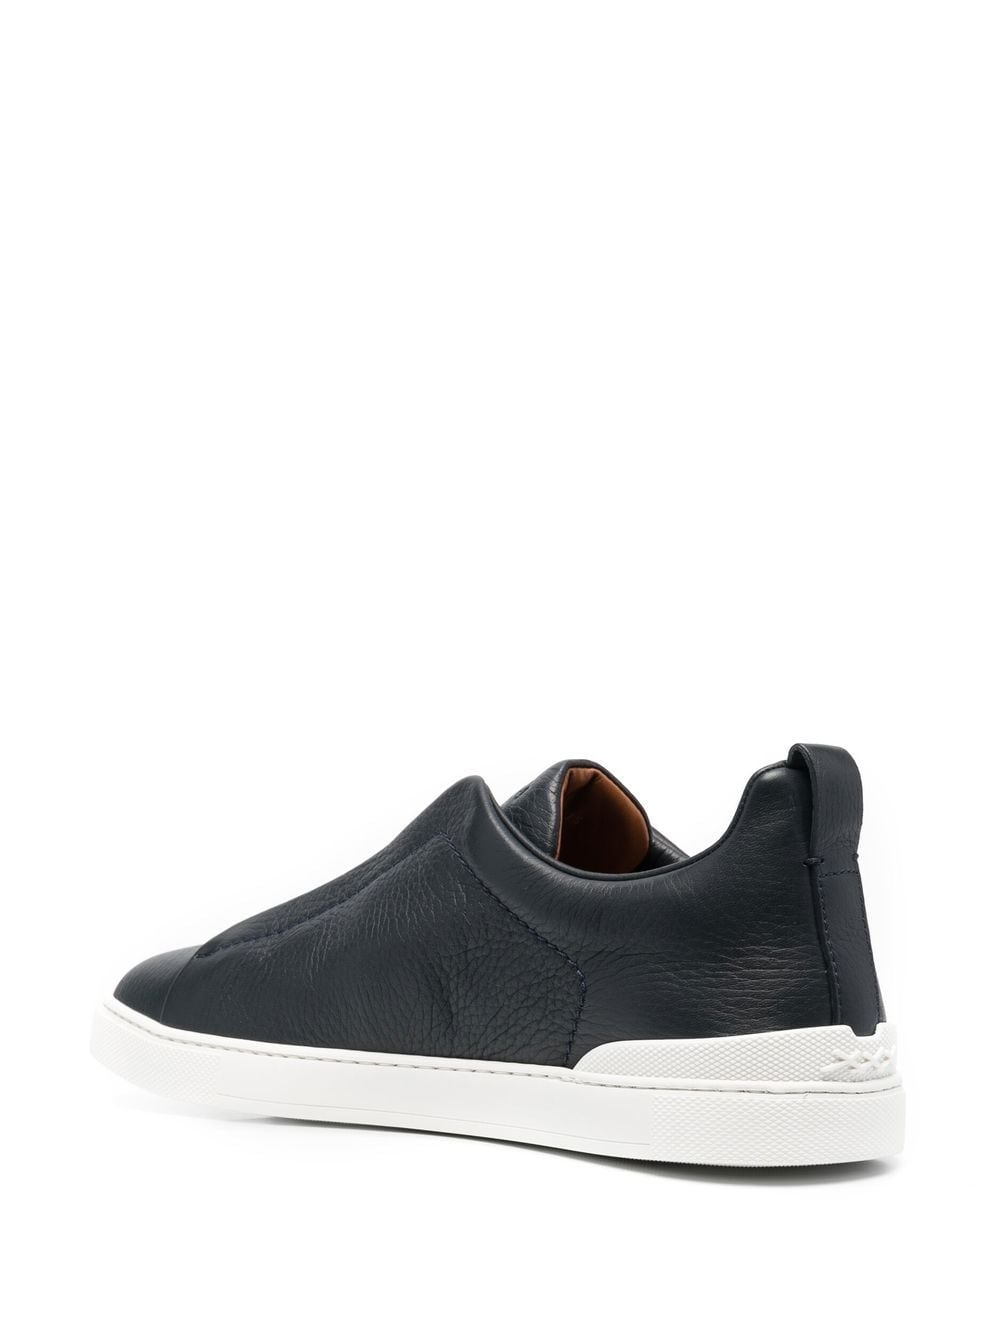 Slip-on leather sneakers<BR/><BR/><BR/>